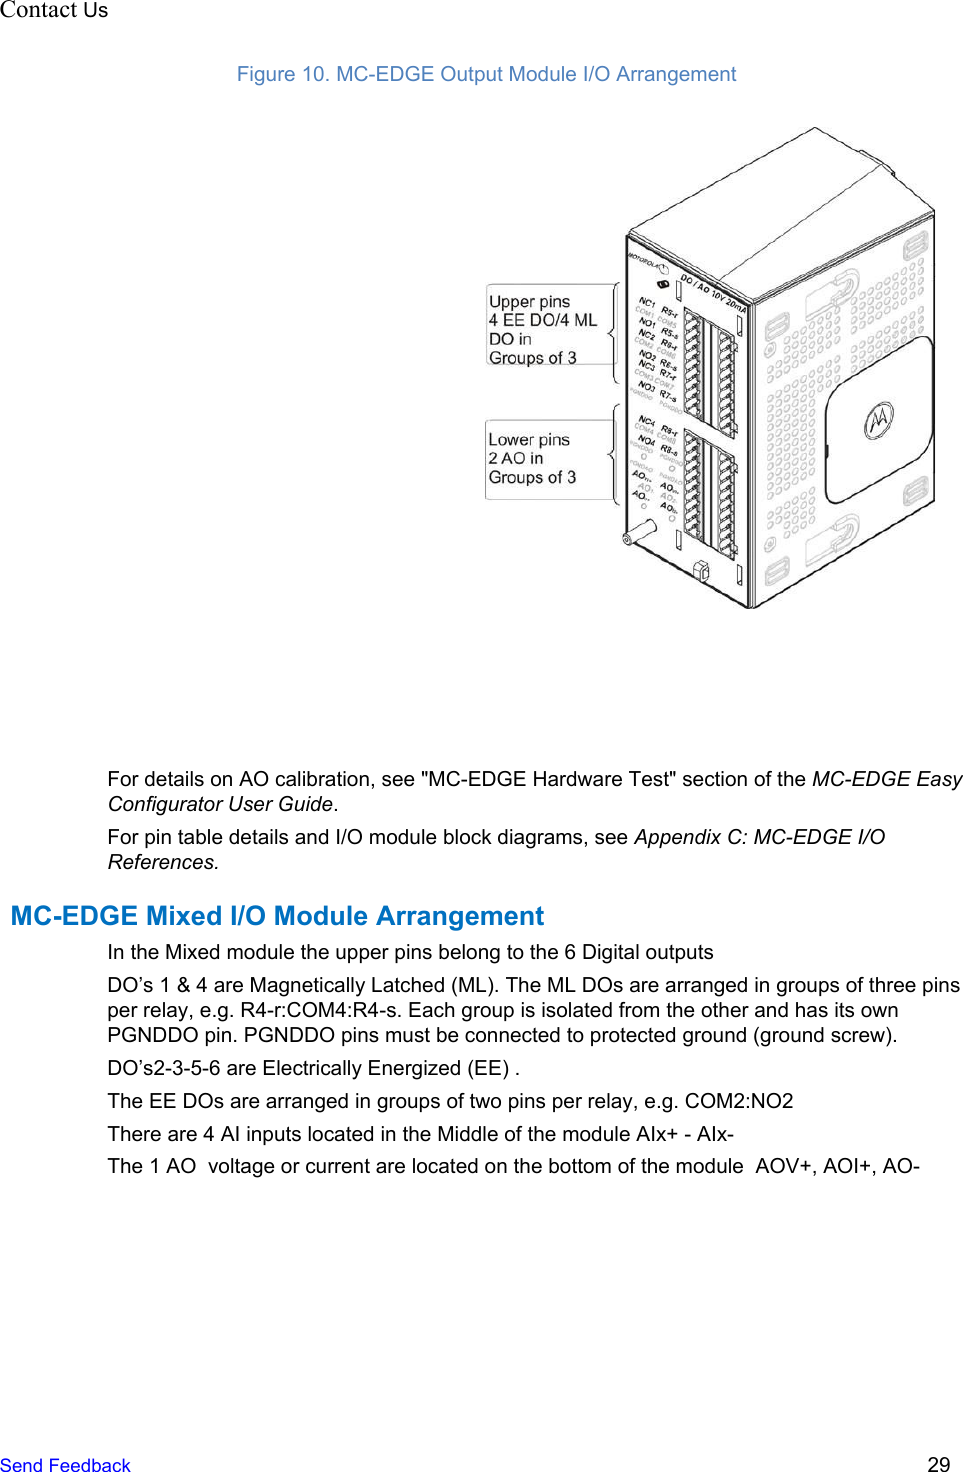 Contact Us                                          Figure 10. MC-EDGE Output Module I/O Arrangement   For details on AO calibration, see &quot;MC-EDGE Hardware Test&quot; section of the MC-EDGE Easy Configurator User Guide. For pin table details and I/O module block diagrams, see Appendix C: MC-EDGE I/O References. MC-EDGE Mixed I/O Module Arrangement In the Mixed module the upper pins belong to the 6 Digital outputs  DO’s 1 &amp; 4 are Magnetically Latched (ML). The ML DOs are arranged in groups of three pins per relay, e.g. R4-r:COM4:R4-s. Each group is isolated from the other and has its own PGNDDO pin. PGNDDO pins must be connected to protected ground (ground screw). DO’s2-3-5-6 are Electrically Energized (EE) . The EE DOs are arranged in groups of two pins per relay, e.g. COM2:NO2 There are 4 AI inputs located in the Middle of the module AIx+ - AIx-  The 1 AO  voltage or current are located on the bottom of the module  AOV+, AOI+, AO-  Send Feedback  29 